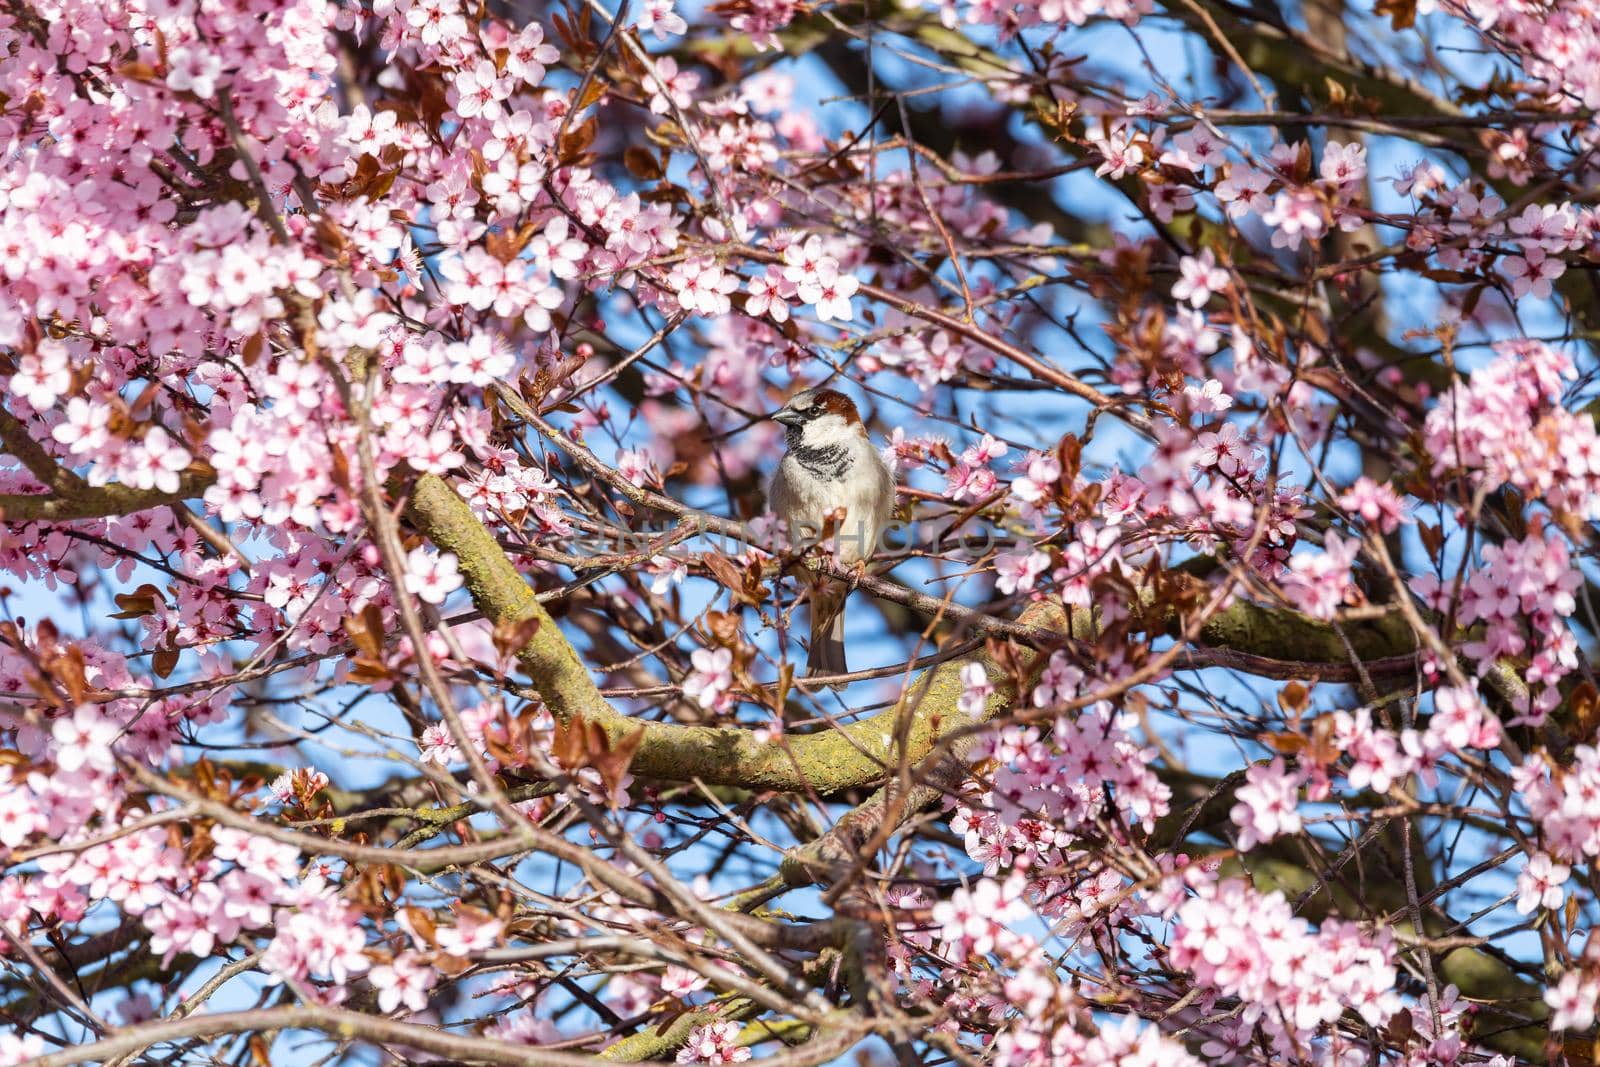 common bird house sparrow, Passer domesticus in the nature perched on flowering Sakura Cherry blossom tree branch. Czech Republic wildlife